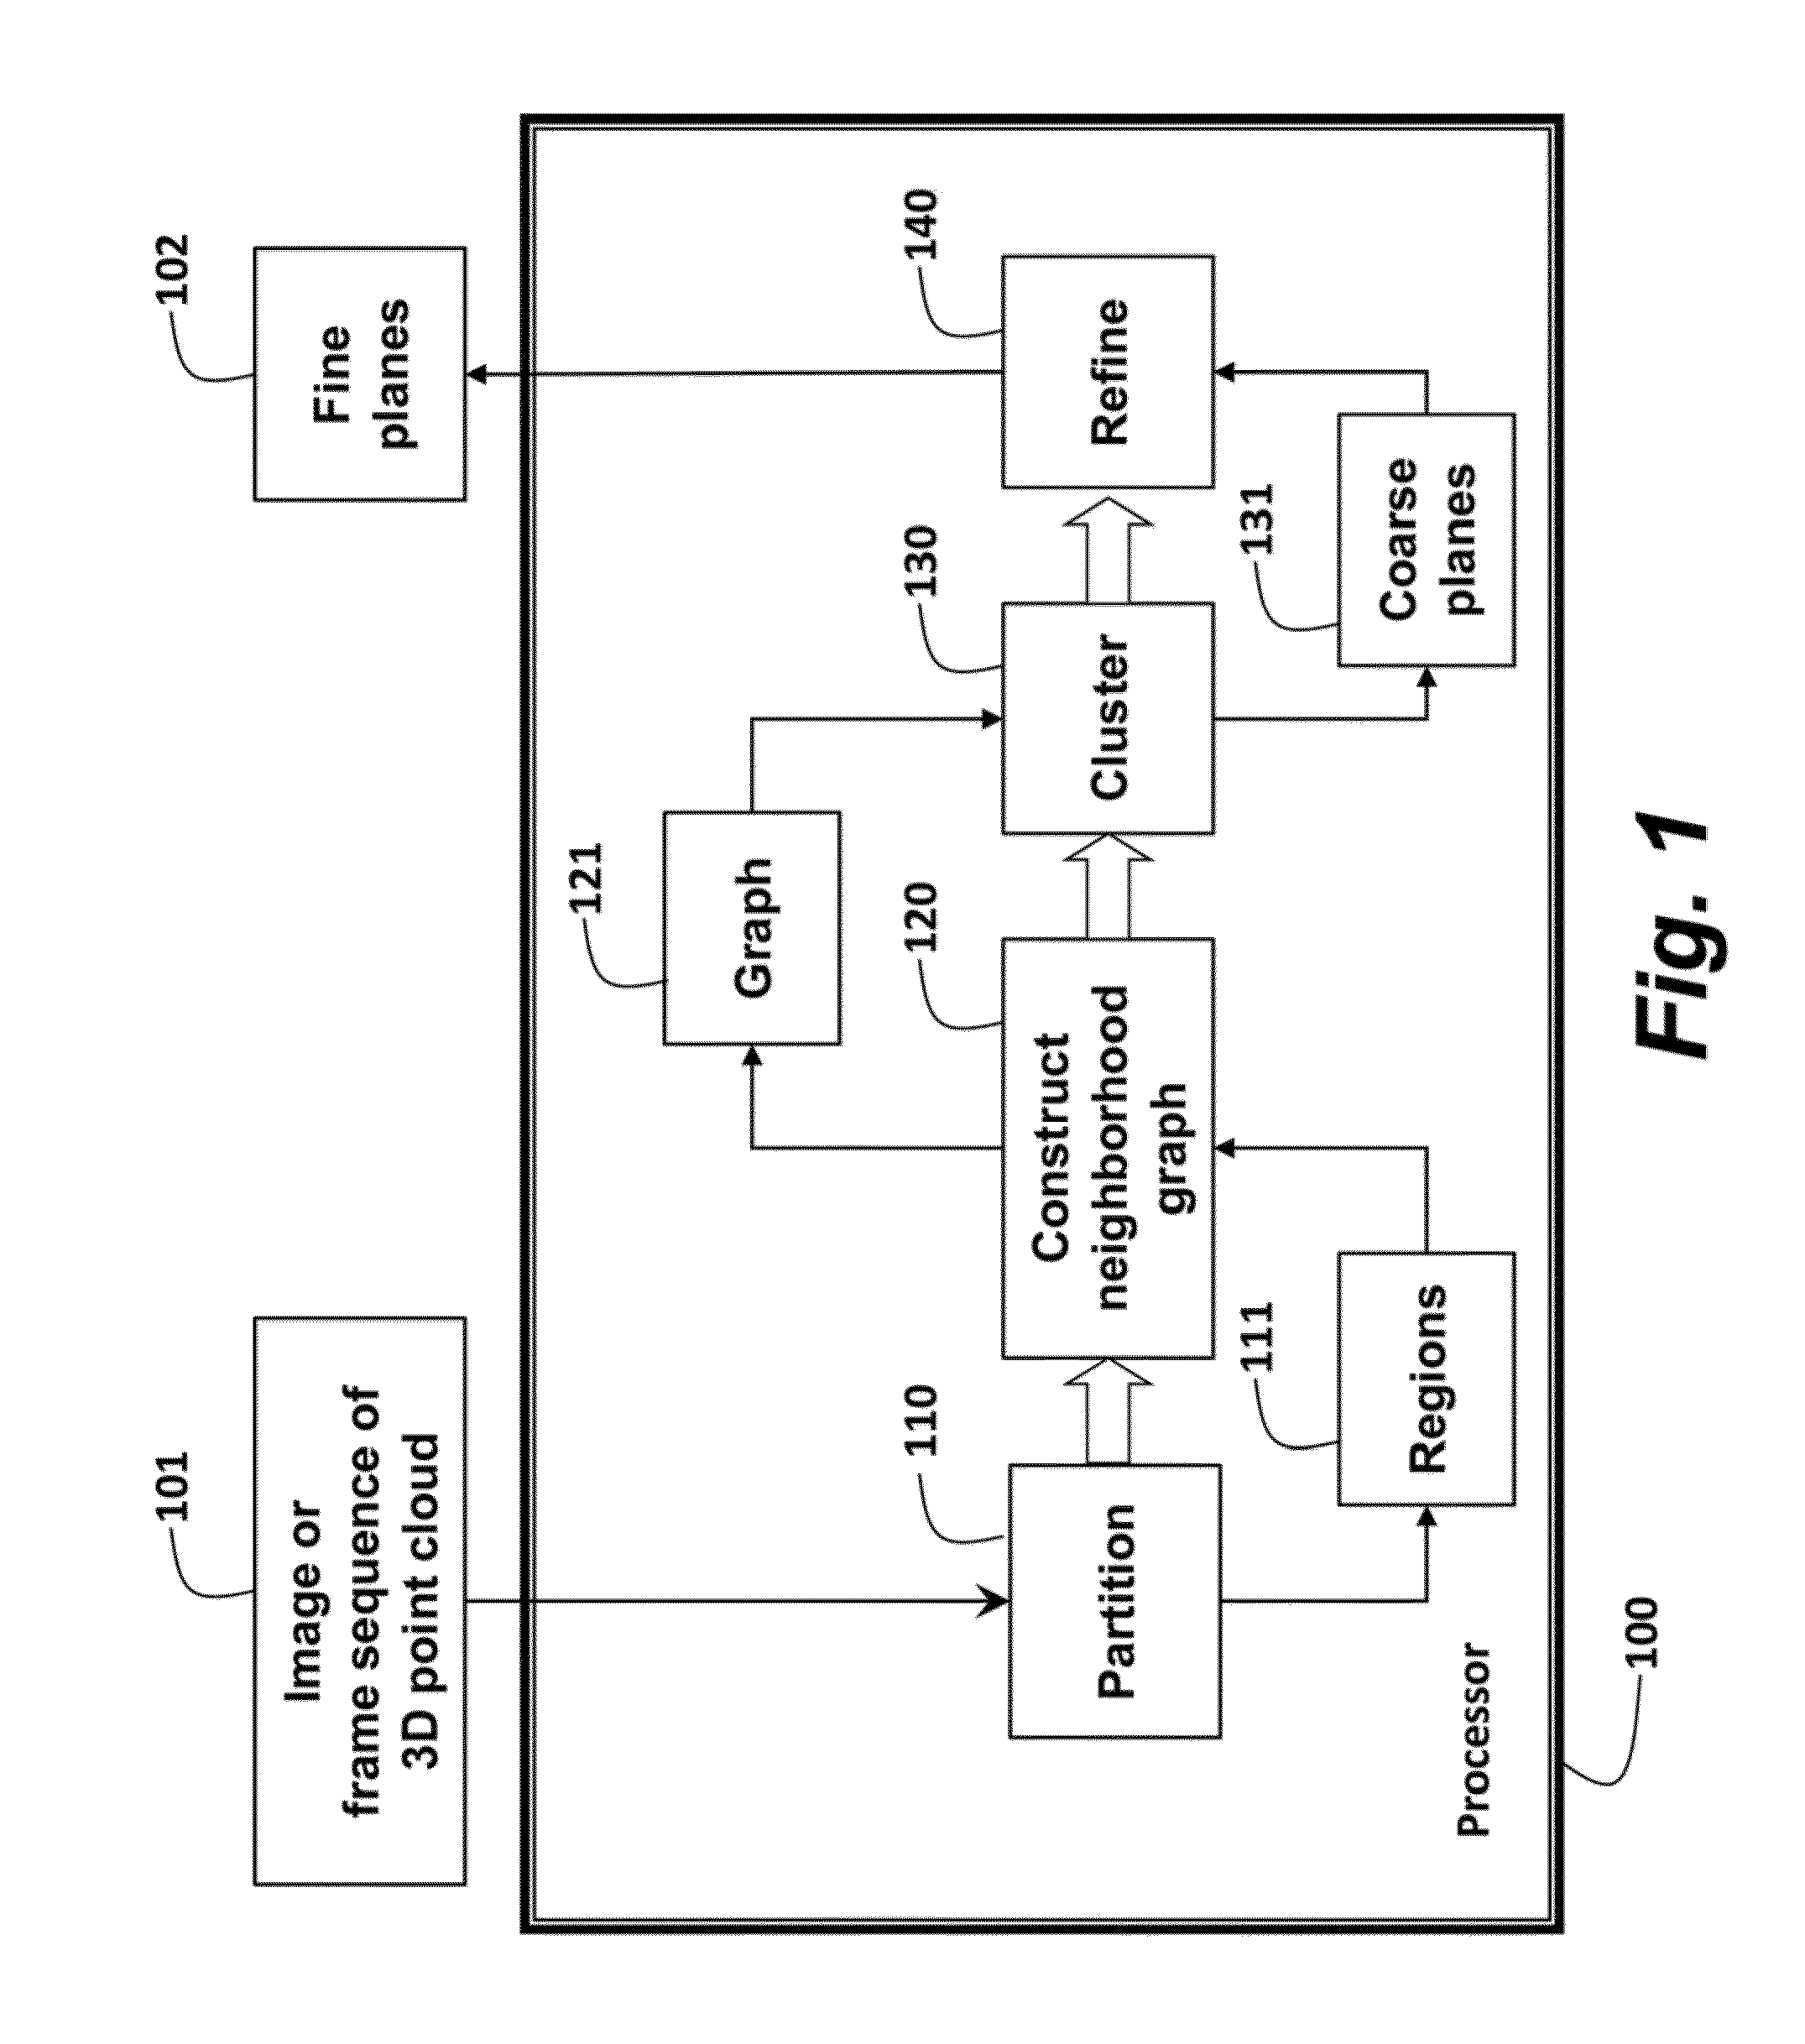 Method for Extracting Planes from 3D Point Cloud Sensor Data